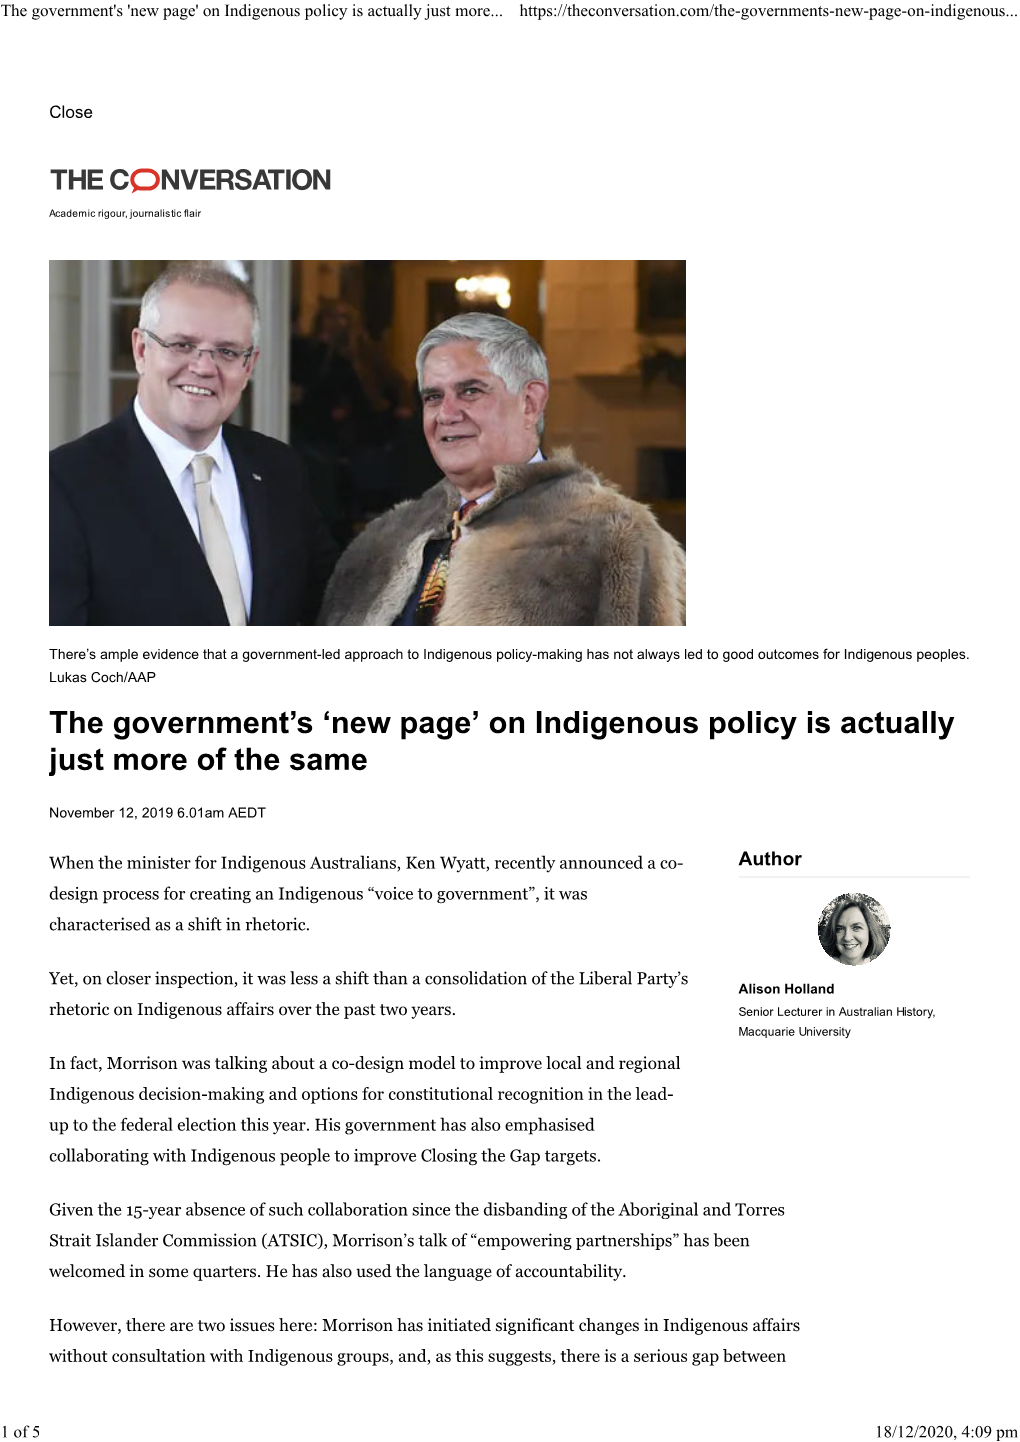 The Government's 'New Page' on Indigenous Policy Is Actually Just More